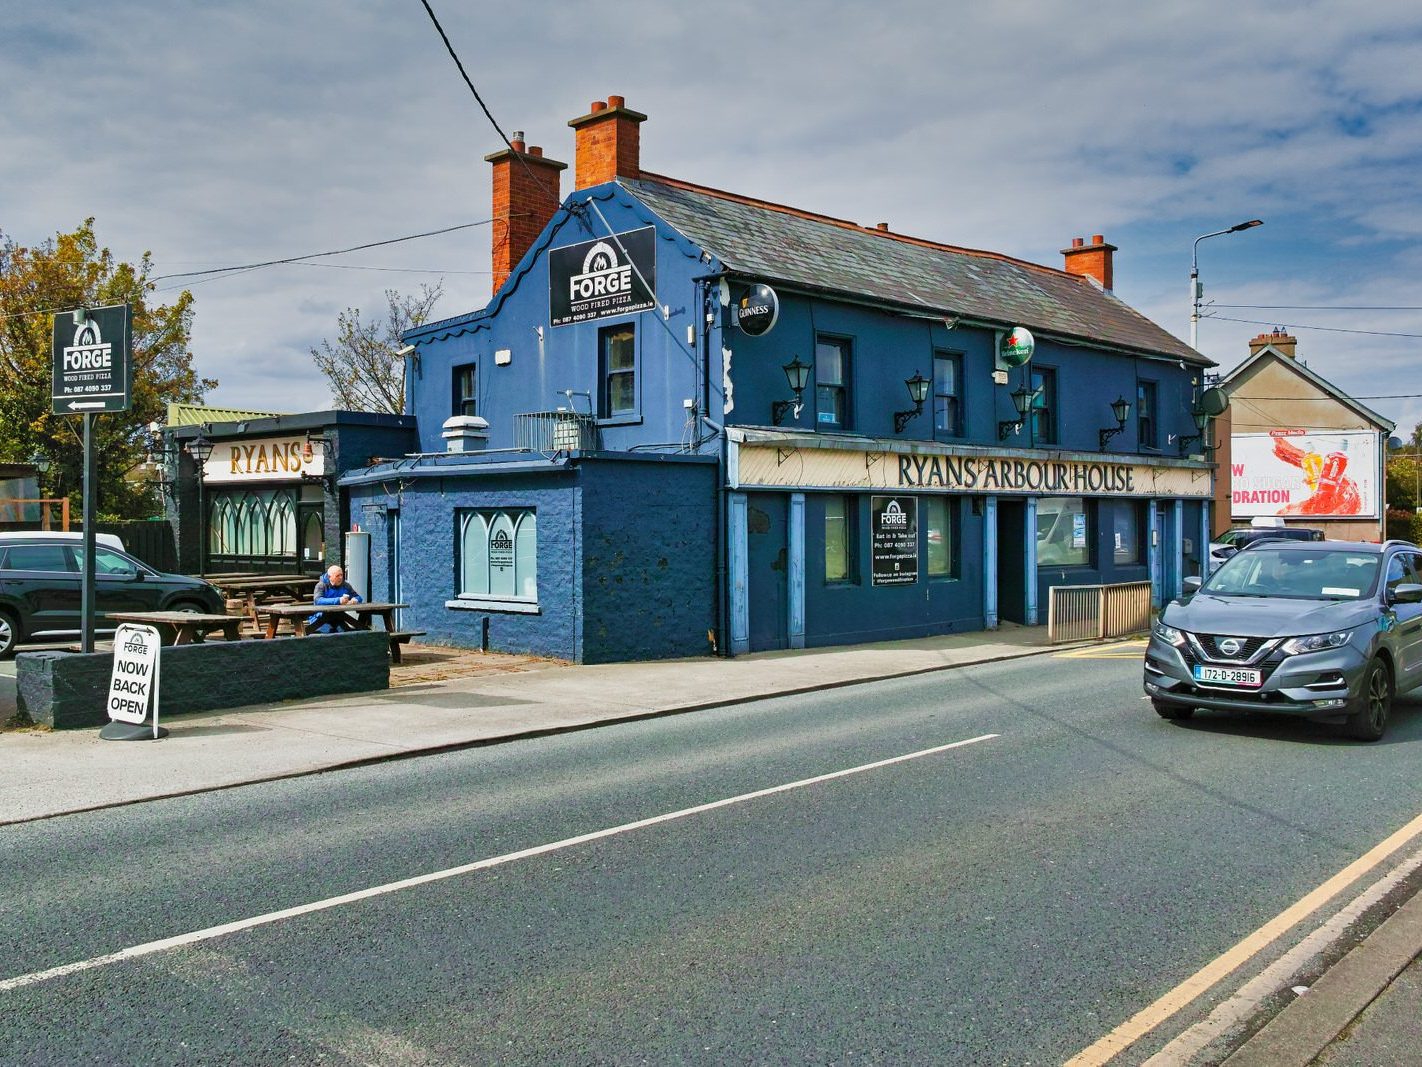 RYANS ARBOUR HOUSE [A PUB IN THE VILLAGE OF WINDY ARBOUR] 003